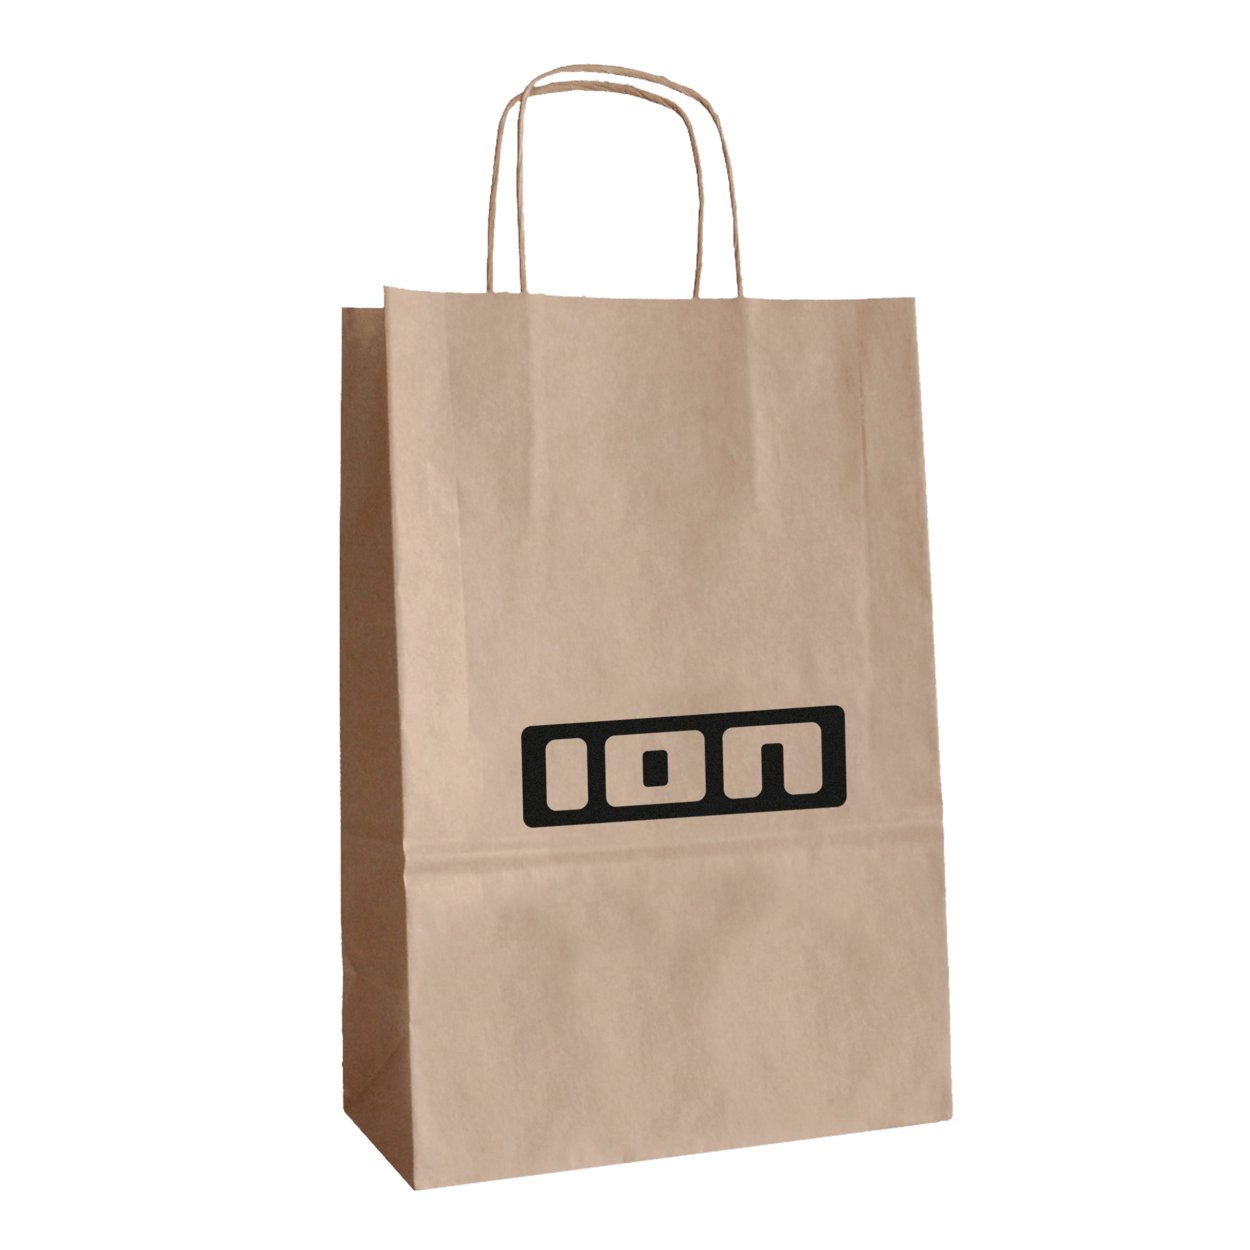 ION Paper Bag (50pcs) 2024 - Worthing Watersports - 9008415582709 - Promotion - ION Water